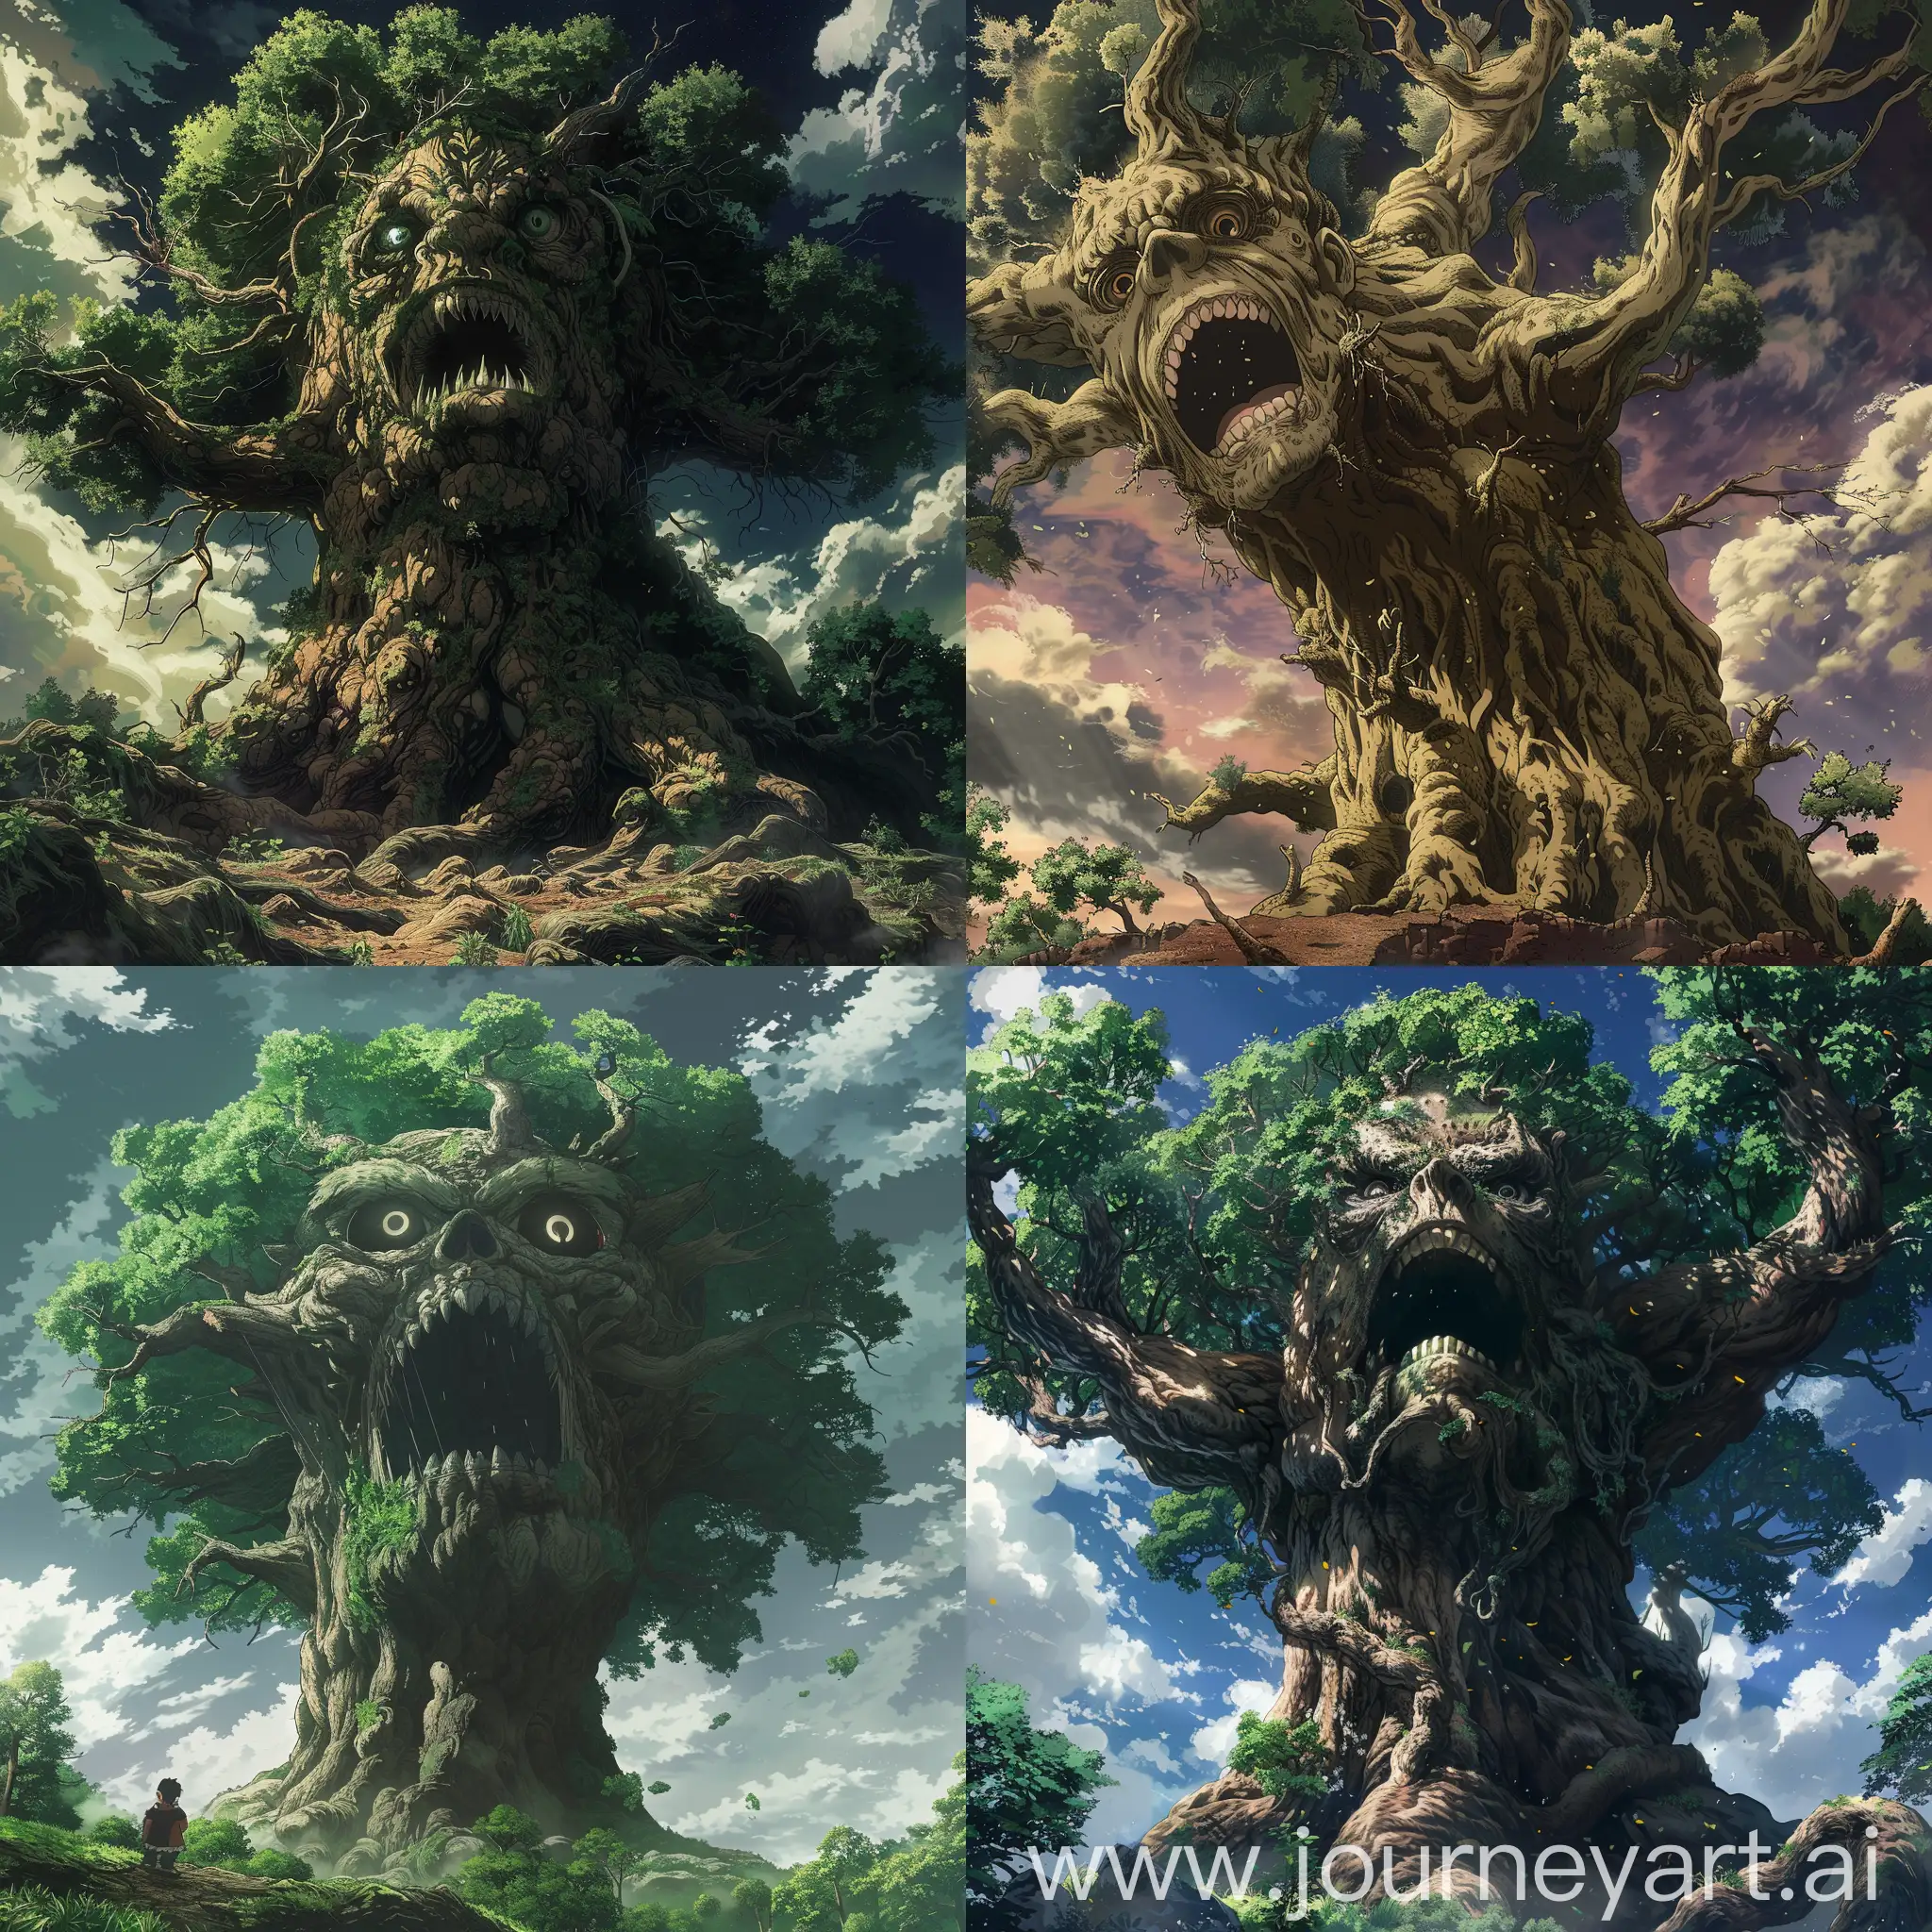 An anime style terrifying, powerful and giant monster tree, from a fantasy tale.